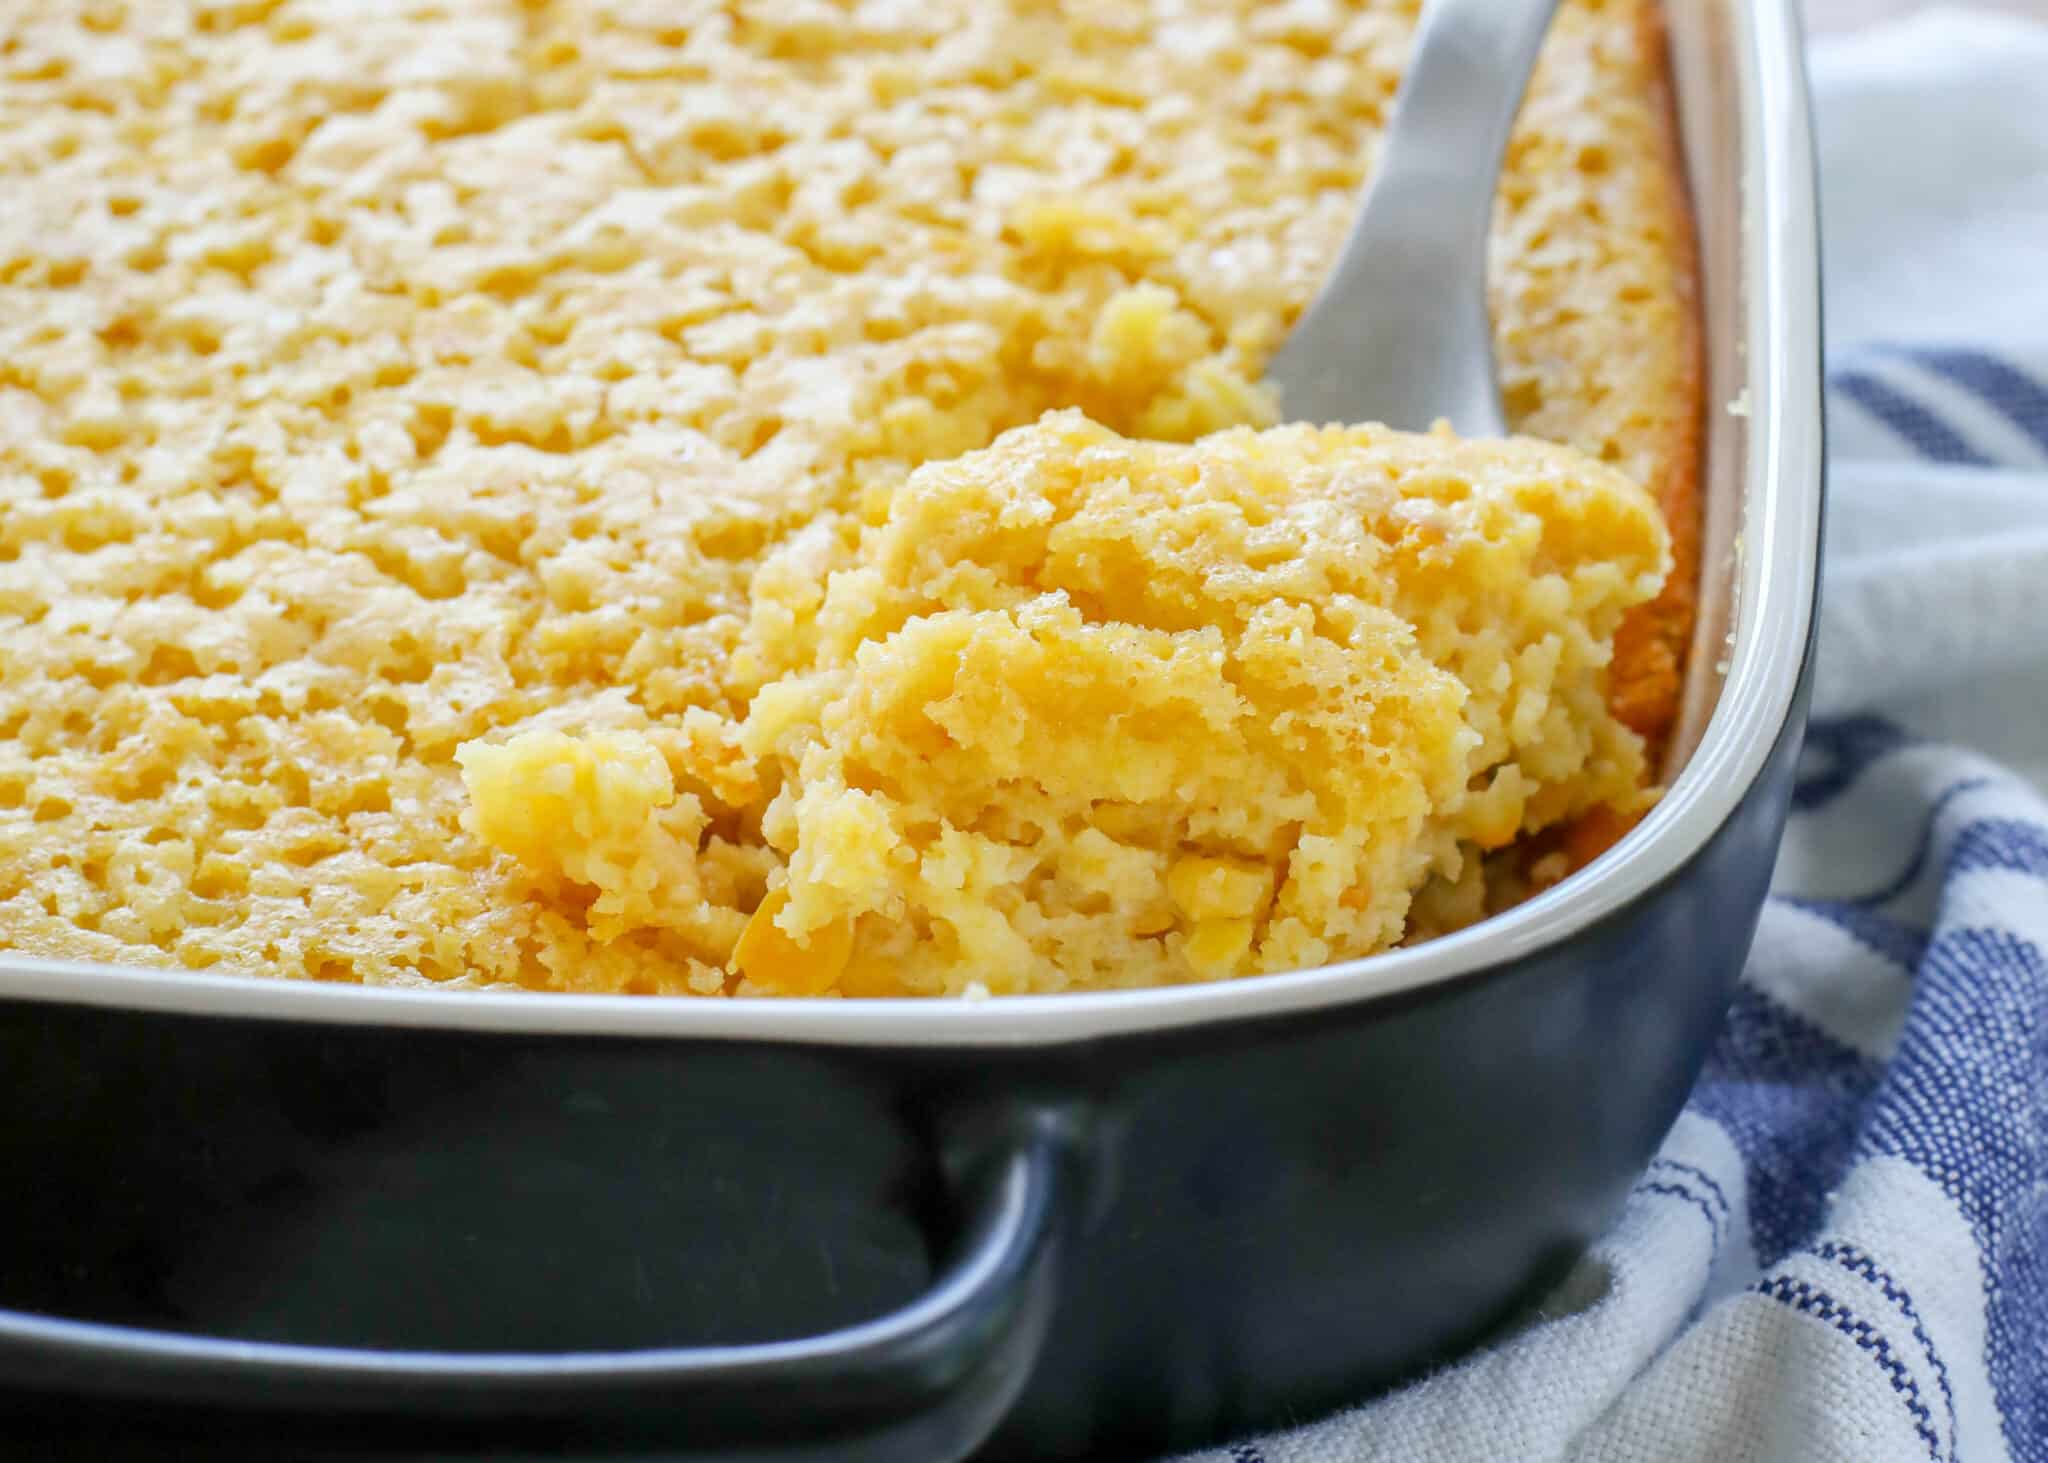 No One Can Resist This Corn Pudding! - Barefeet In The Kitchen